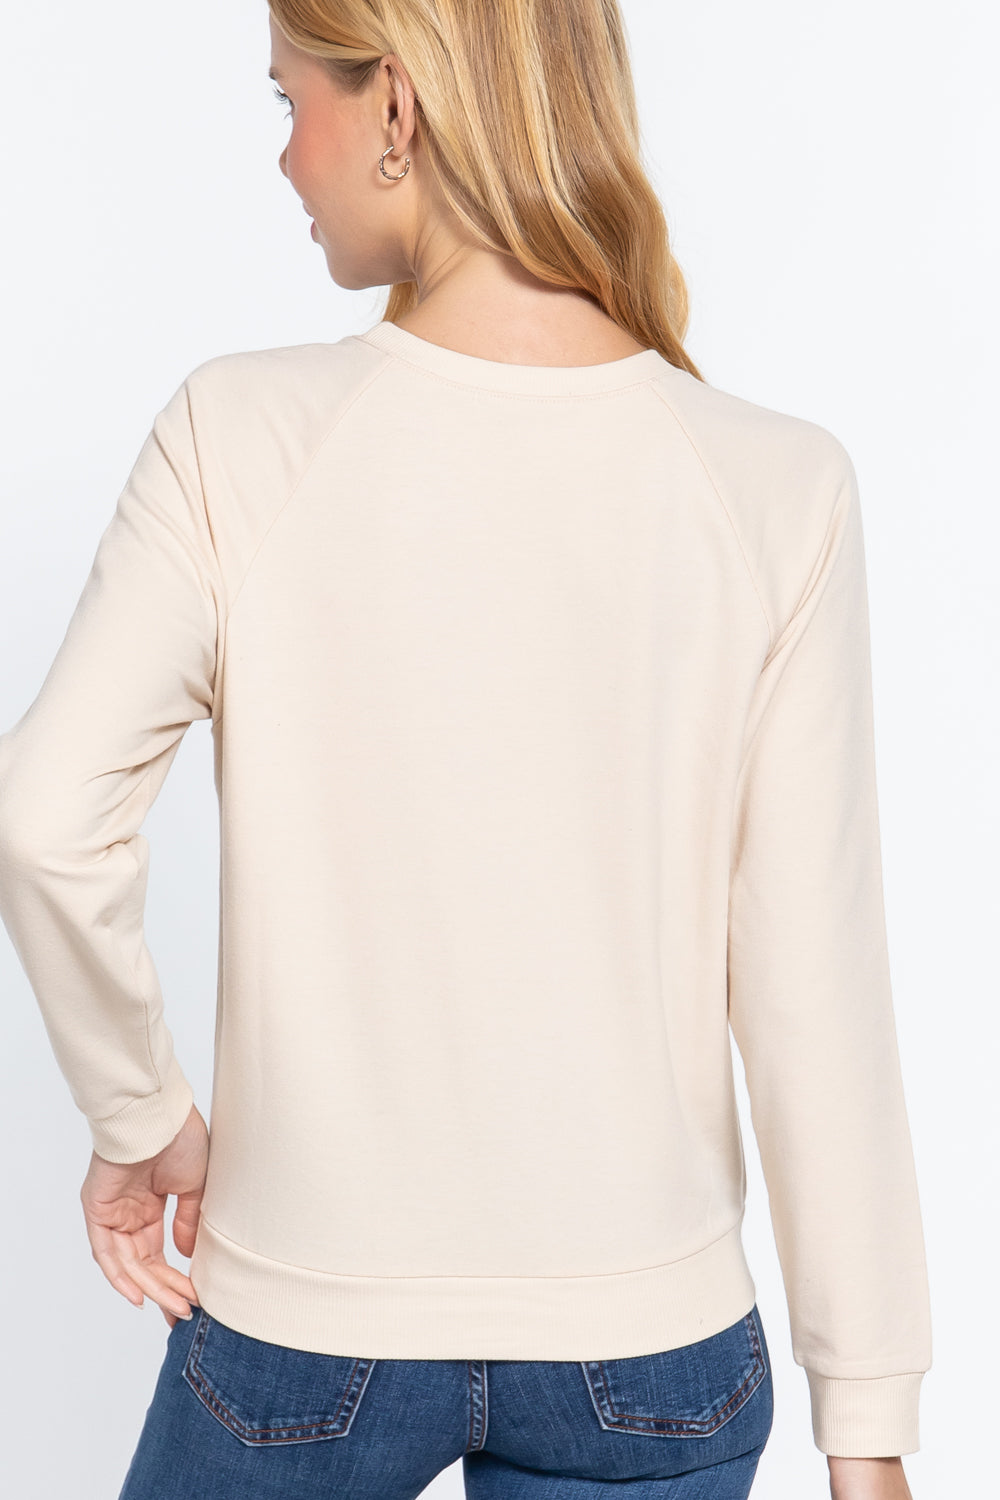 Sequins French Terry Pullover Top Sunny EvE Fashion